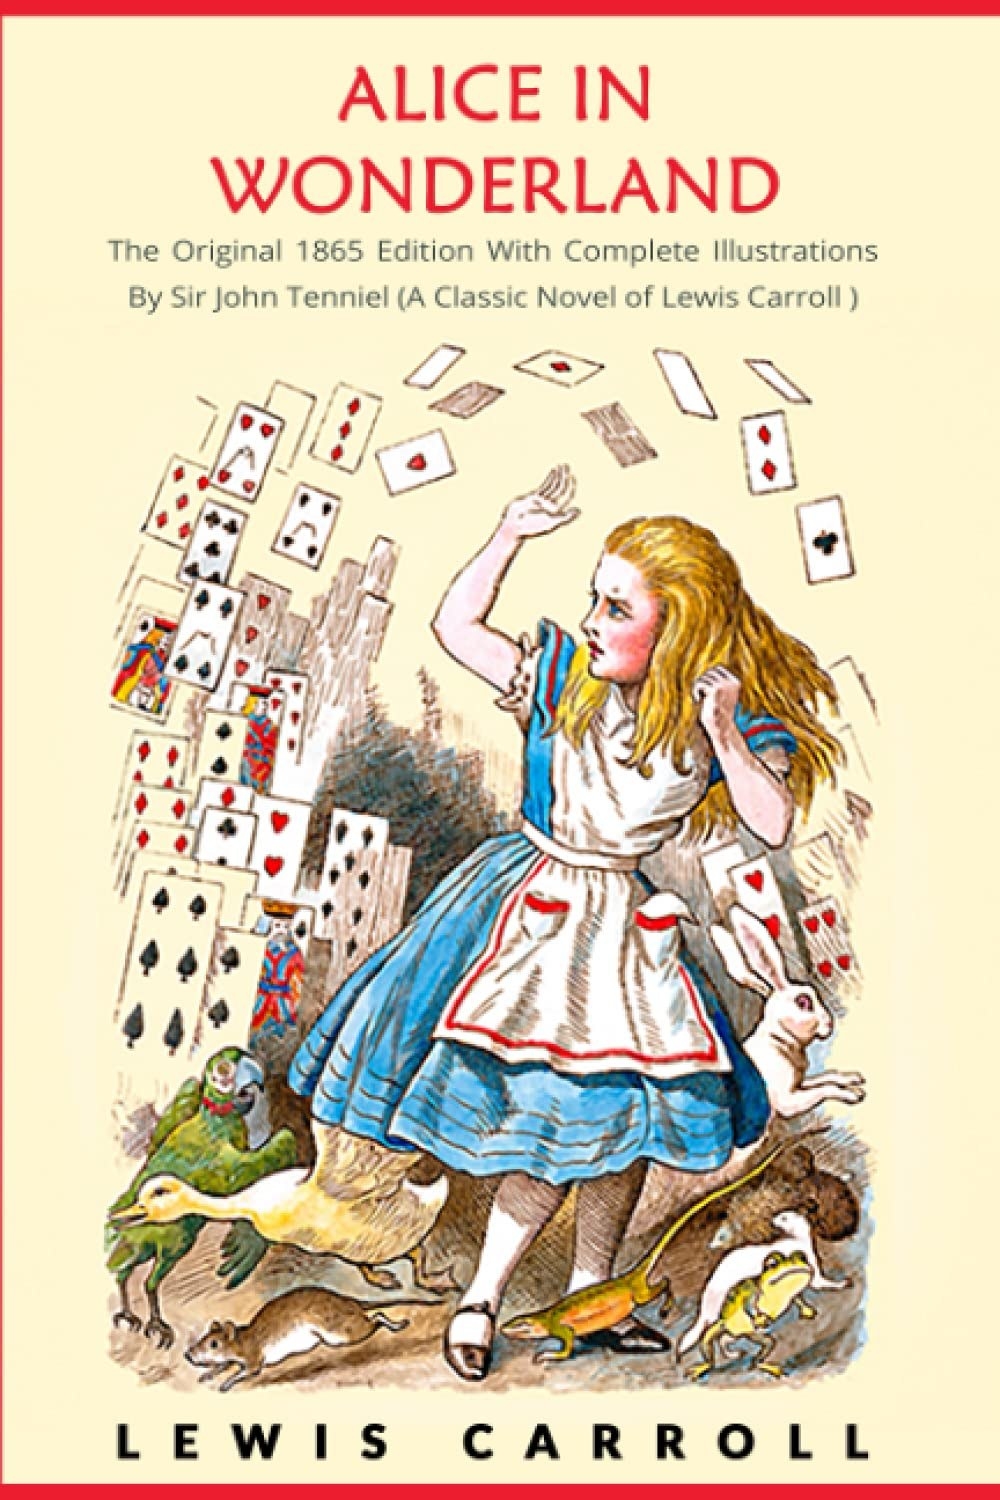 The cover of &quot;Alice in Wonderland&quot; by Lewis Carroll.